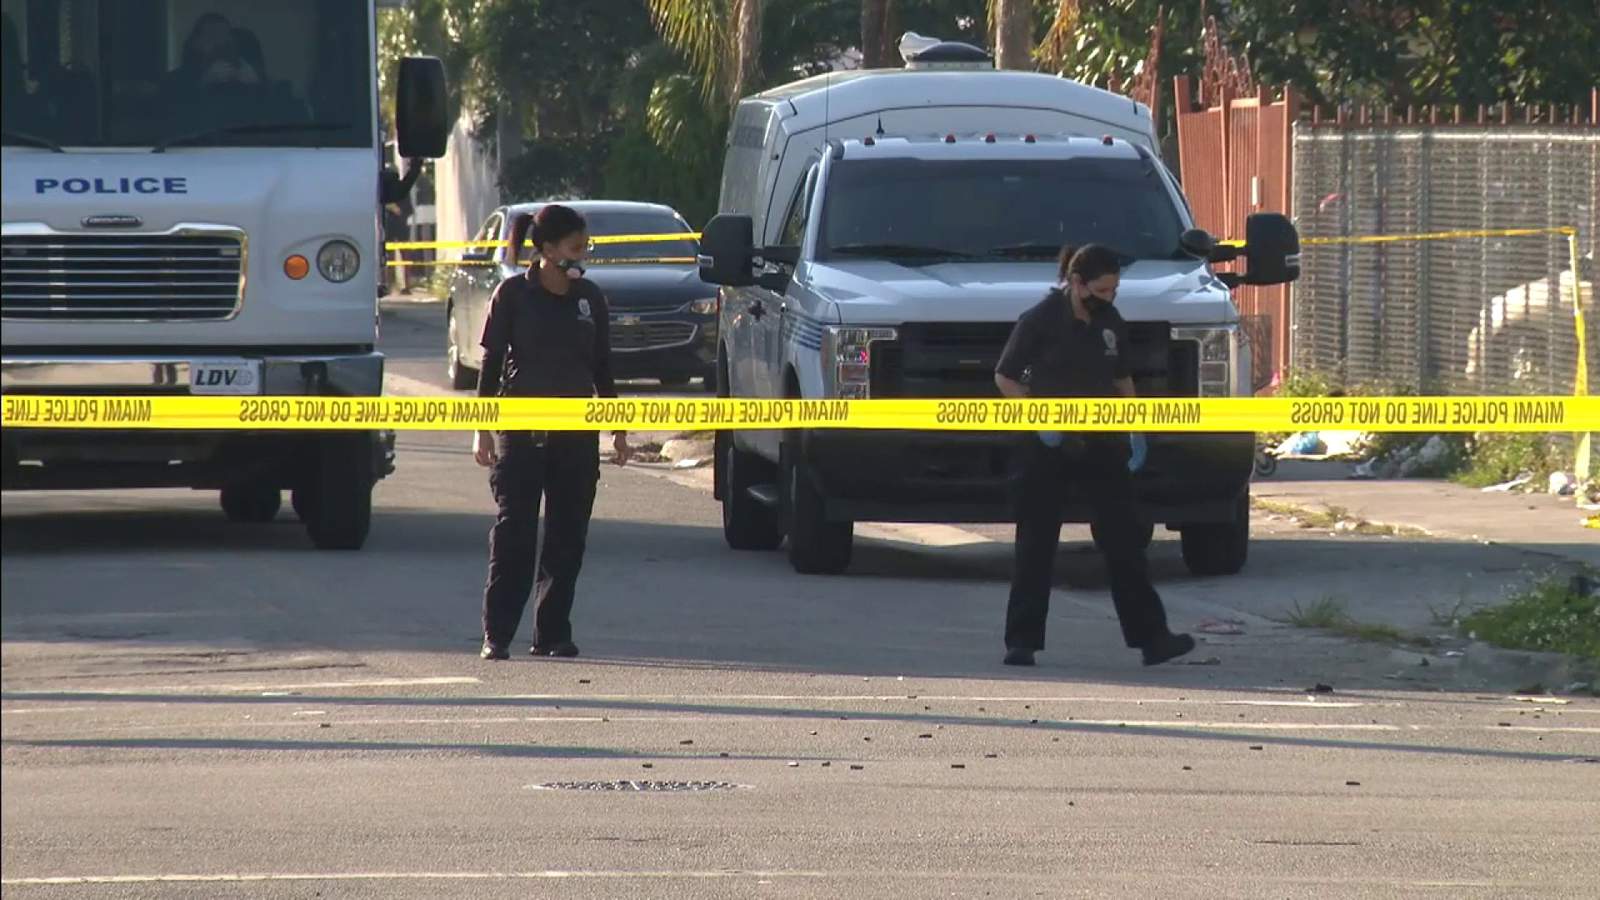 After afternoon drive-by, residents in Liberty City neighborhood say violence needs to stop